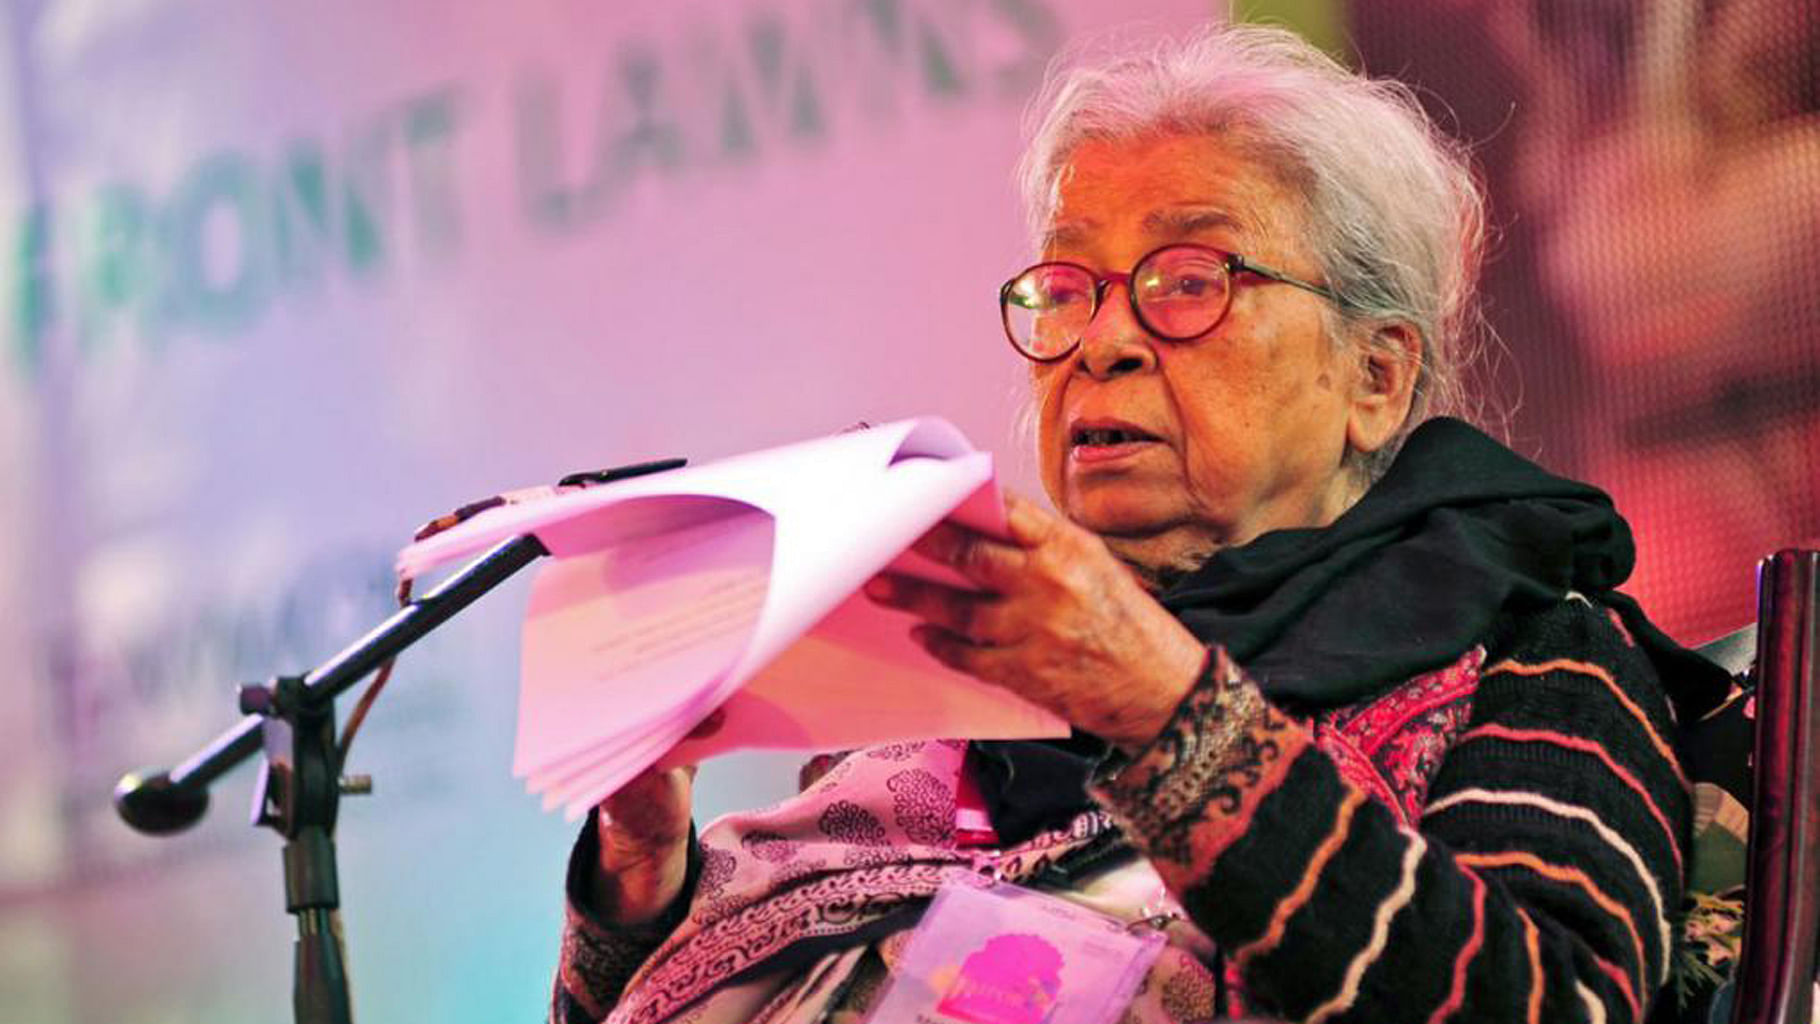 Journalist. Author. Activist. Professor. Mahasweta Devi led by example.&nbsp;(Photo Courtesy: <a href="https://twitter.com/airnewsalerts?ref_src=twsrc%5Egoogle%7Ctwcamp%5Eserp%7Ctwgr%5Eauthor">All india Radio’s Twitter page</a>)